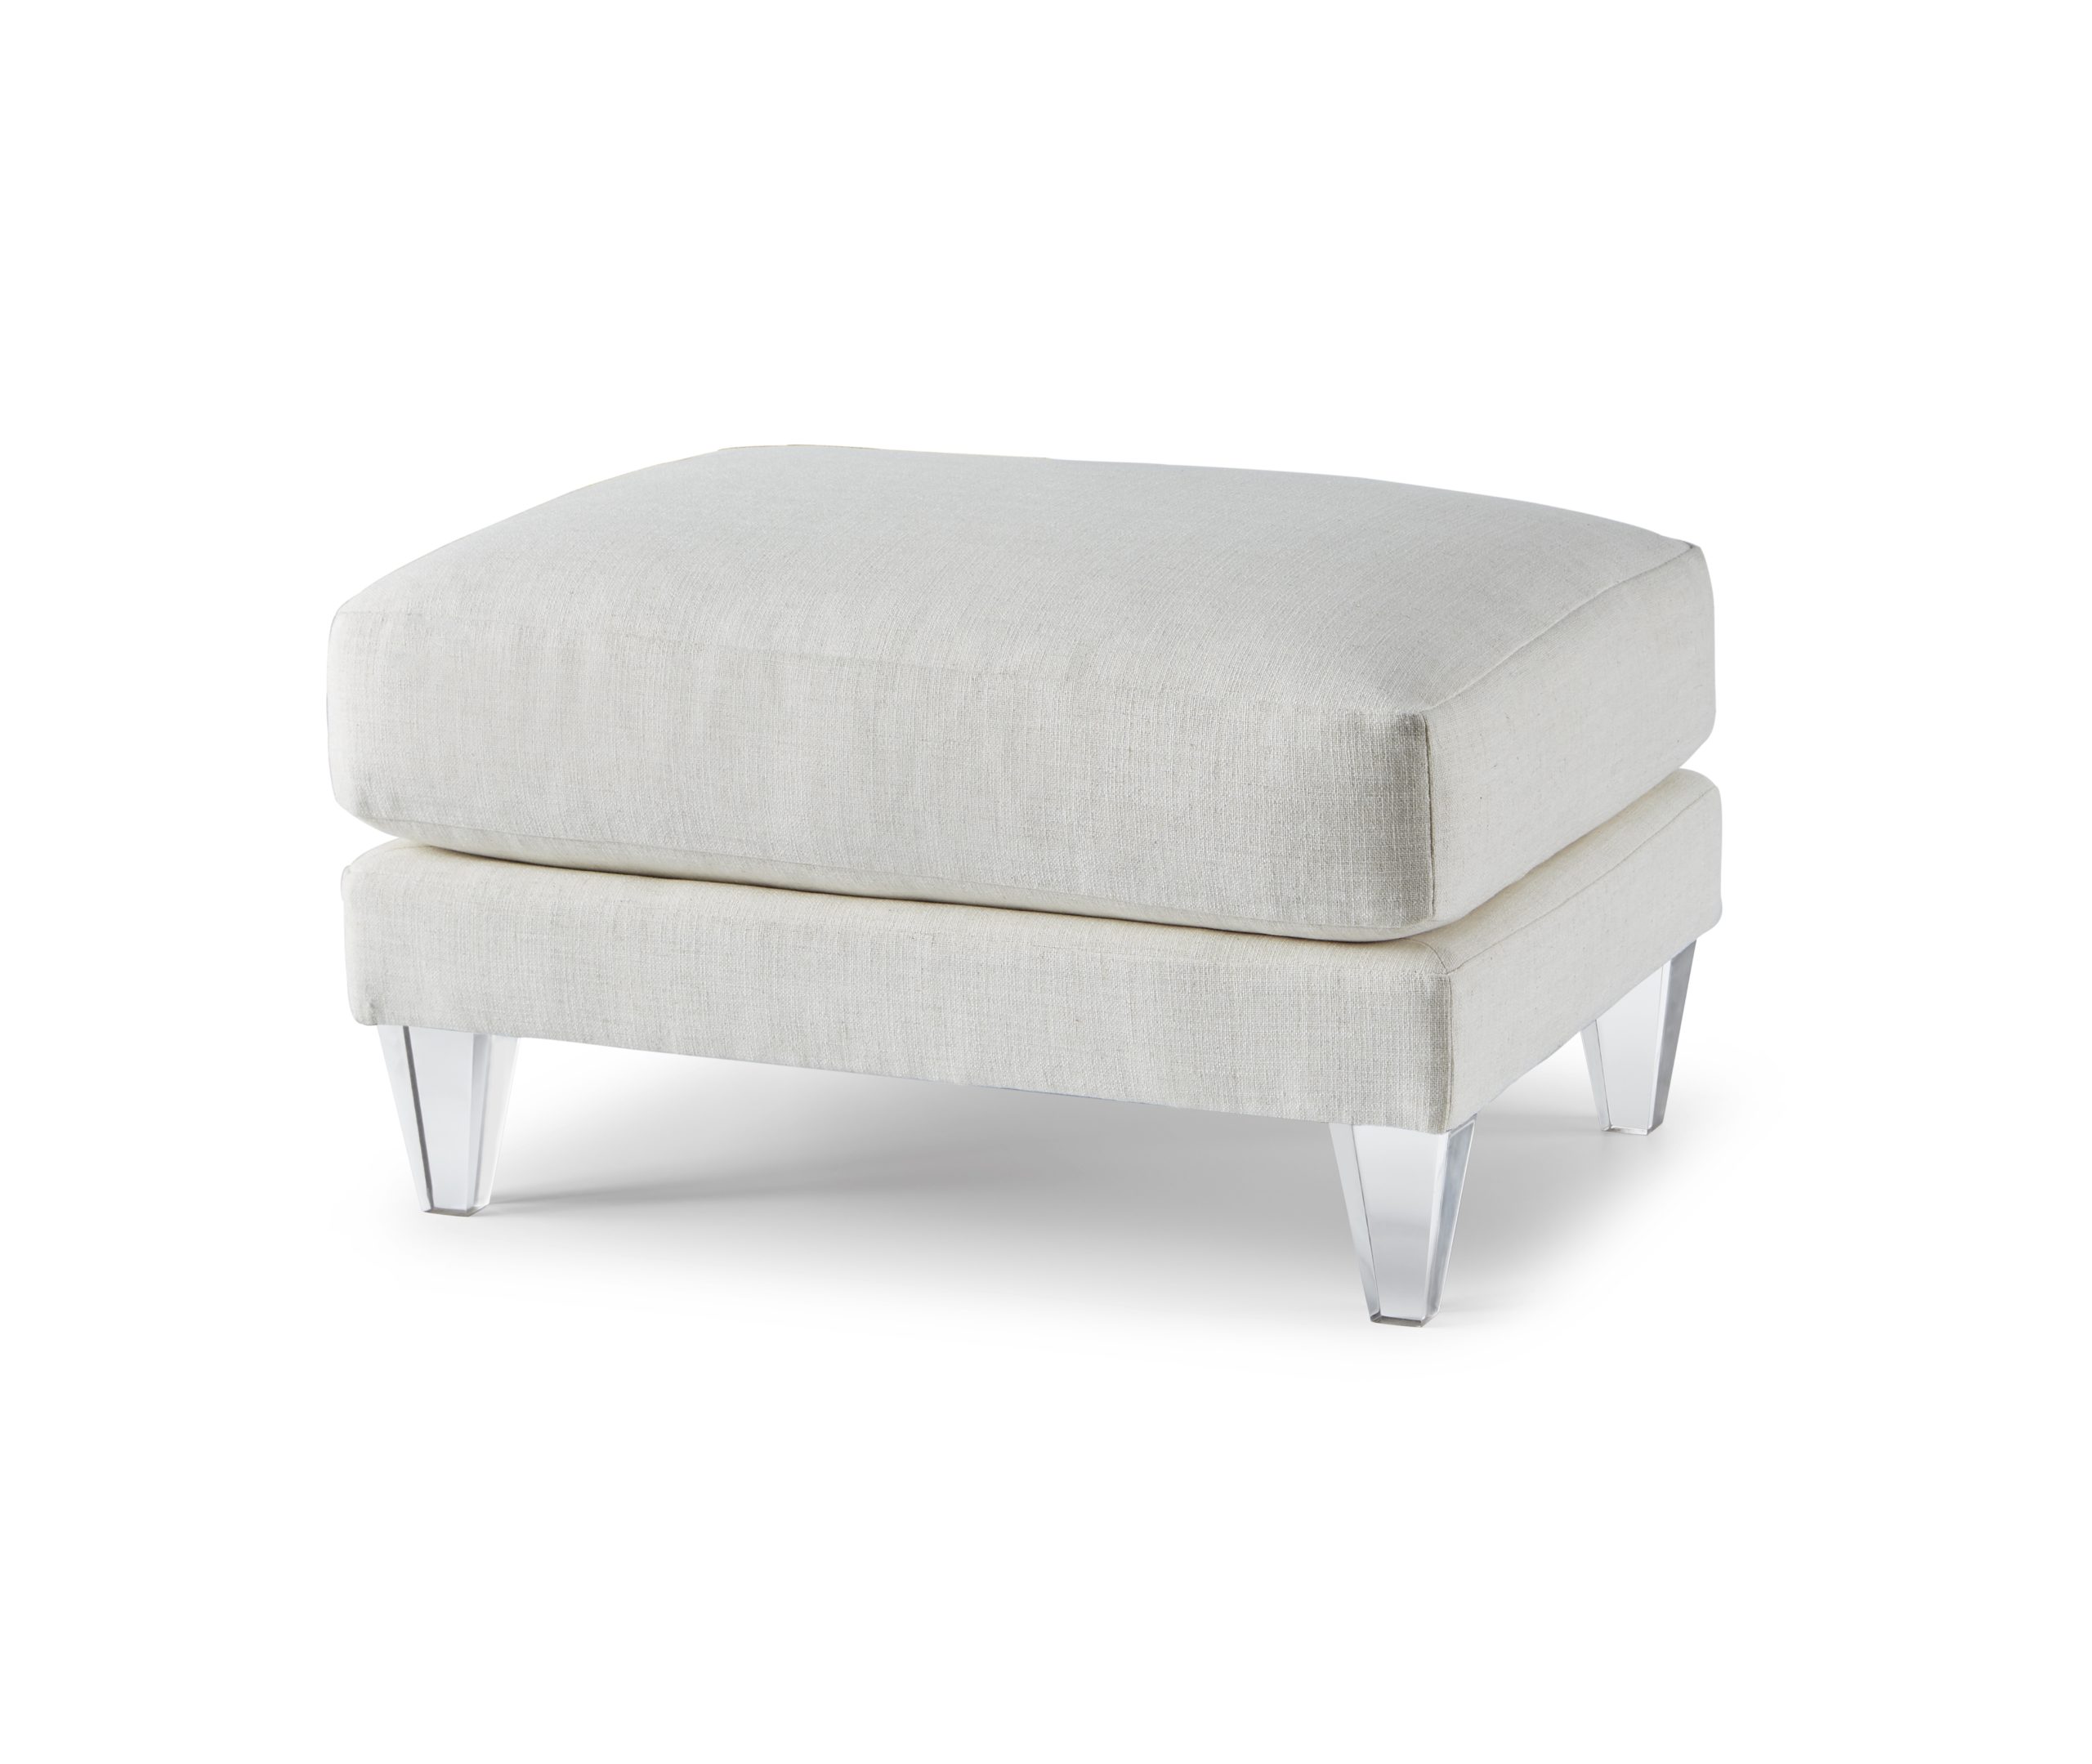 Baker_products_WNWN_taylor_ottoman_BAU3102o_FRONT_3QRT-scaled-1